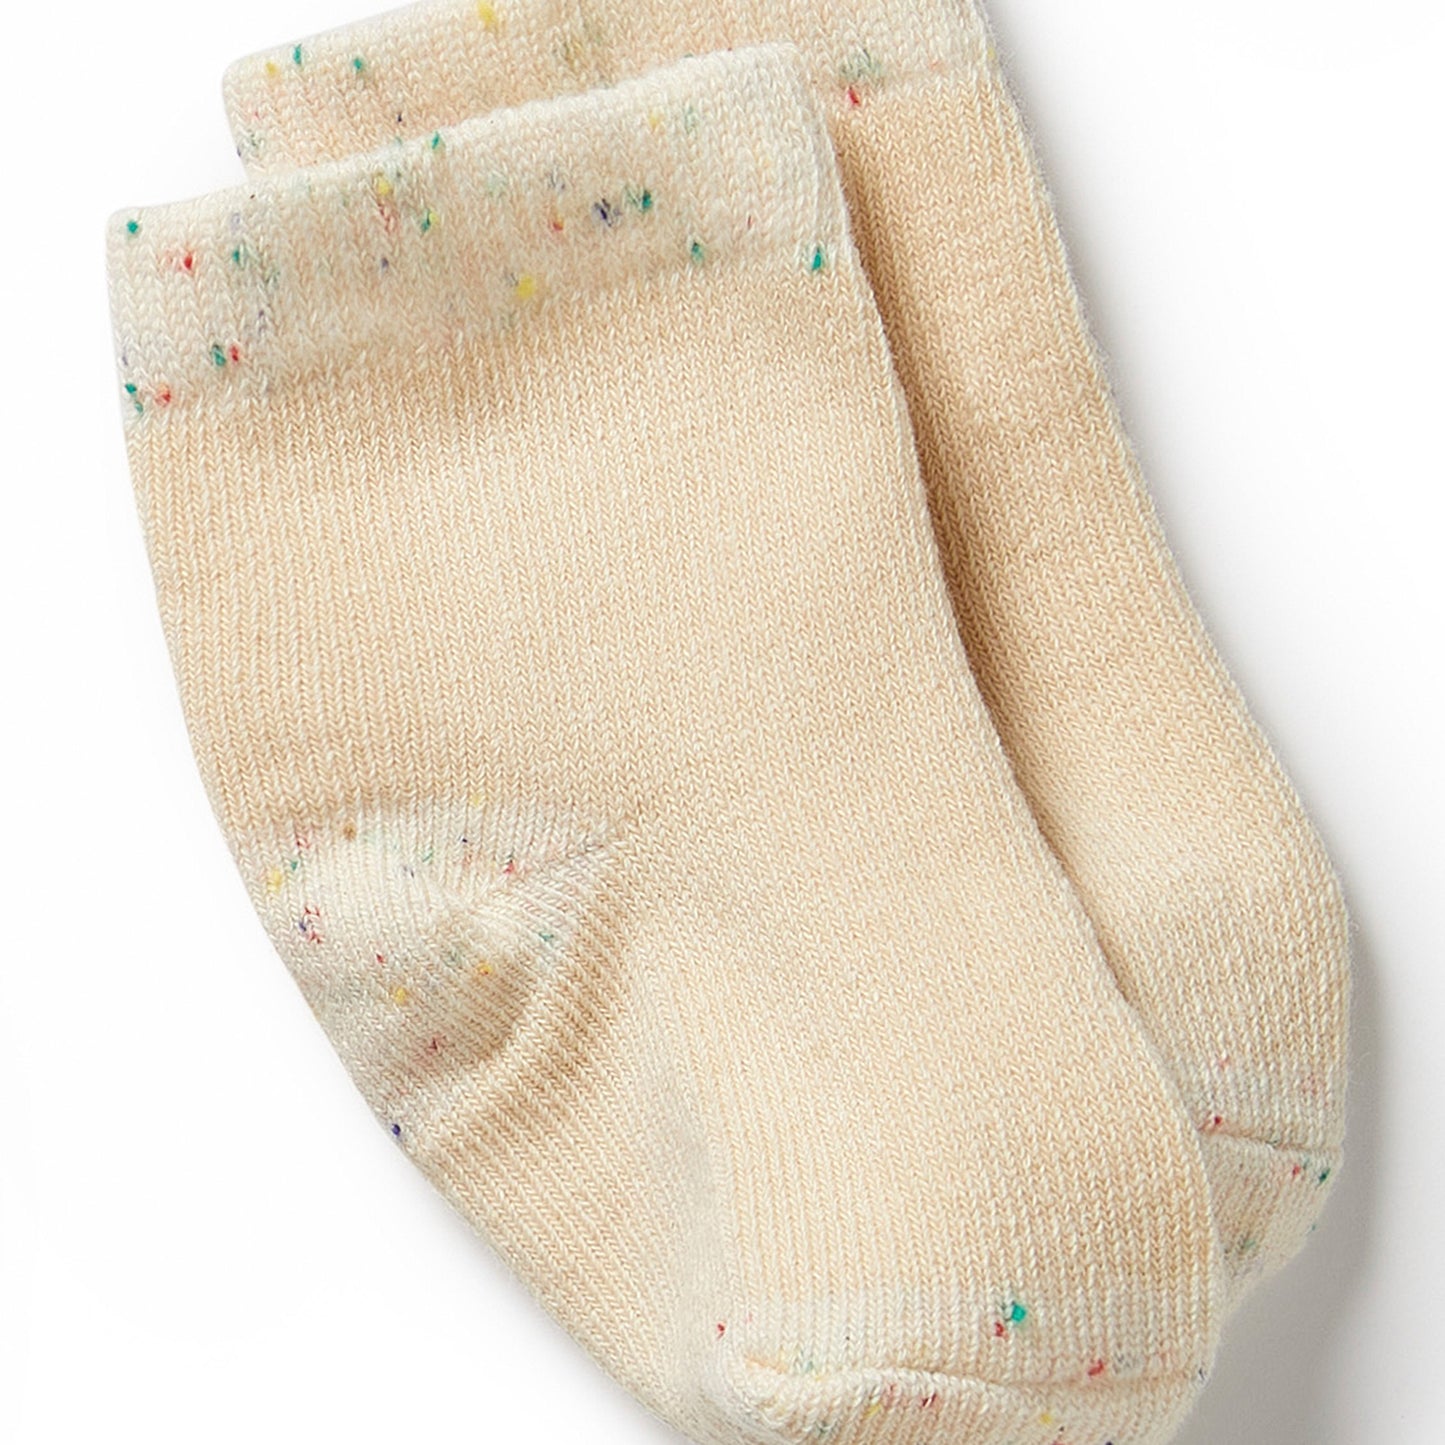 Wilson and Frenchy - ORGANIC 3 PACK BABY SOCKS - MINT GREEN, CREAM, PINK